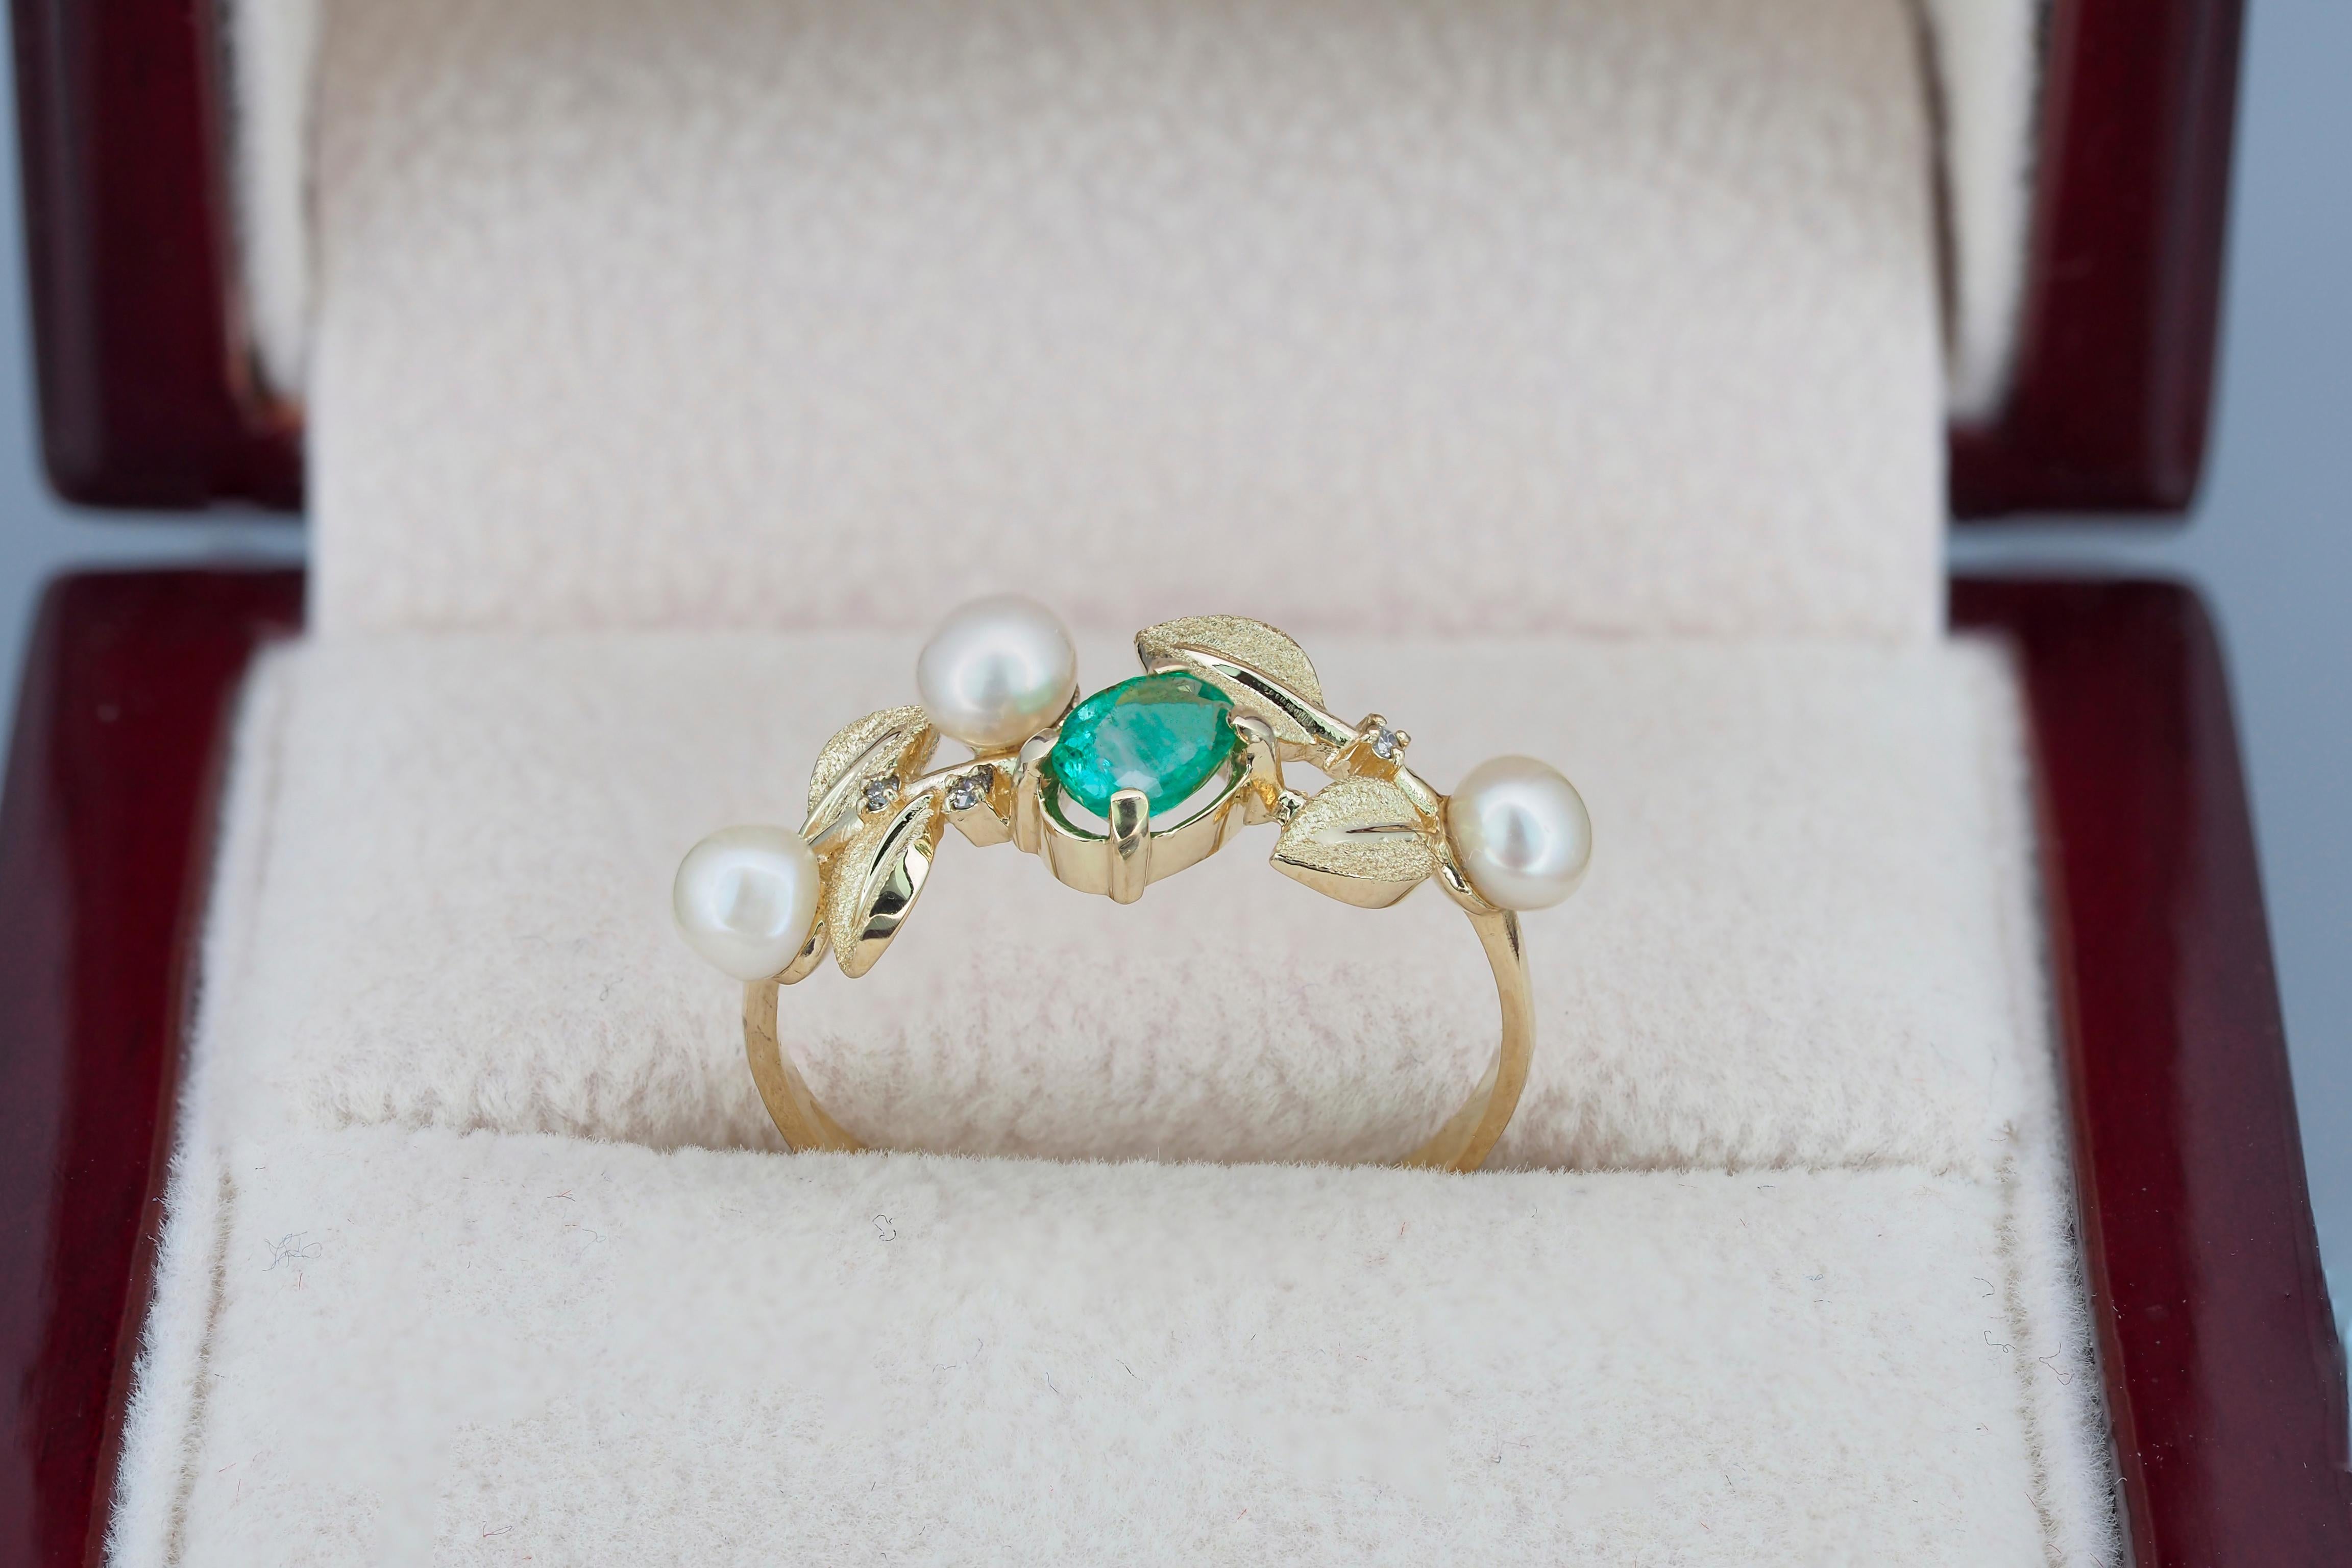 For Sale:  14k Gold Ring with Emerald, Pearls and Diamonds 5